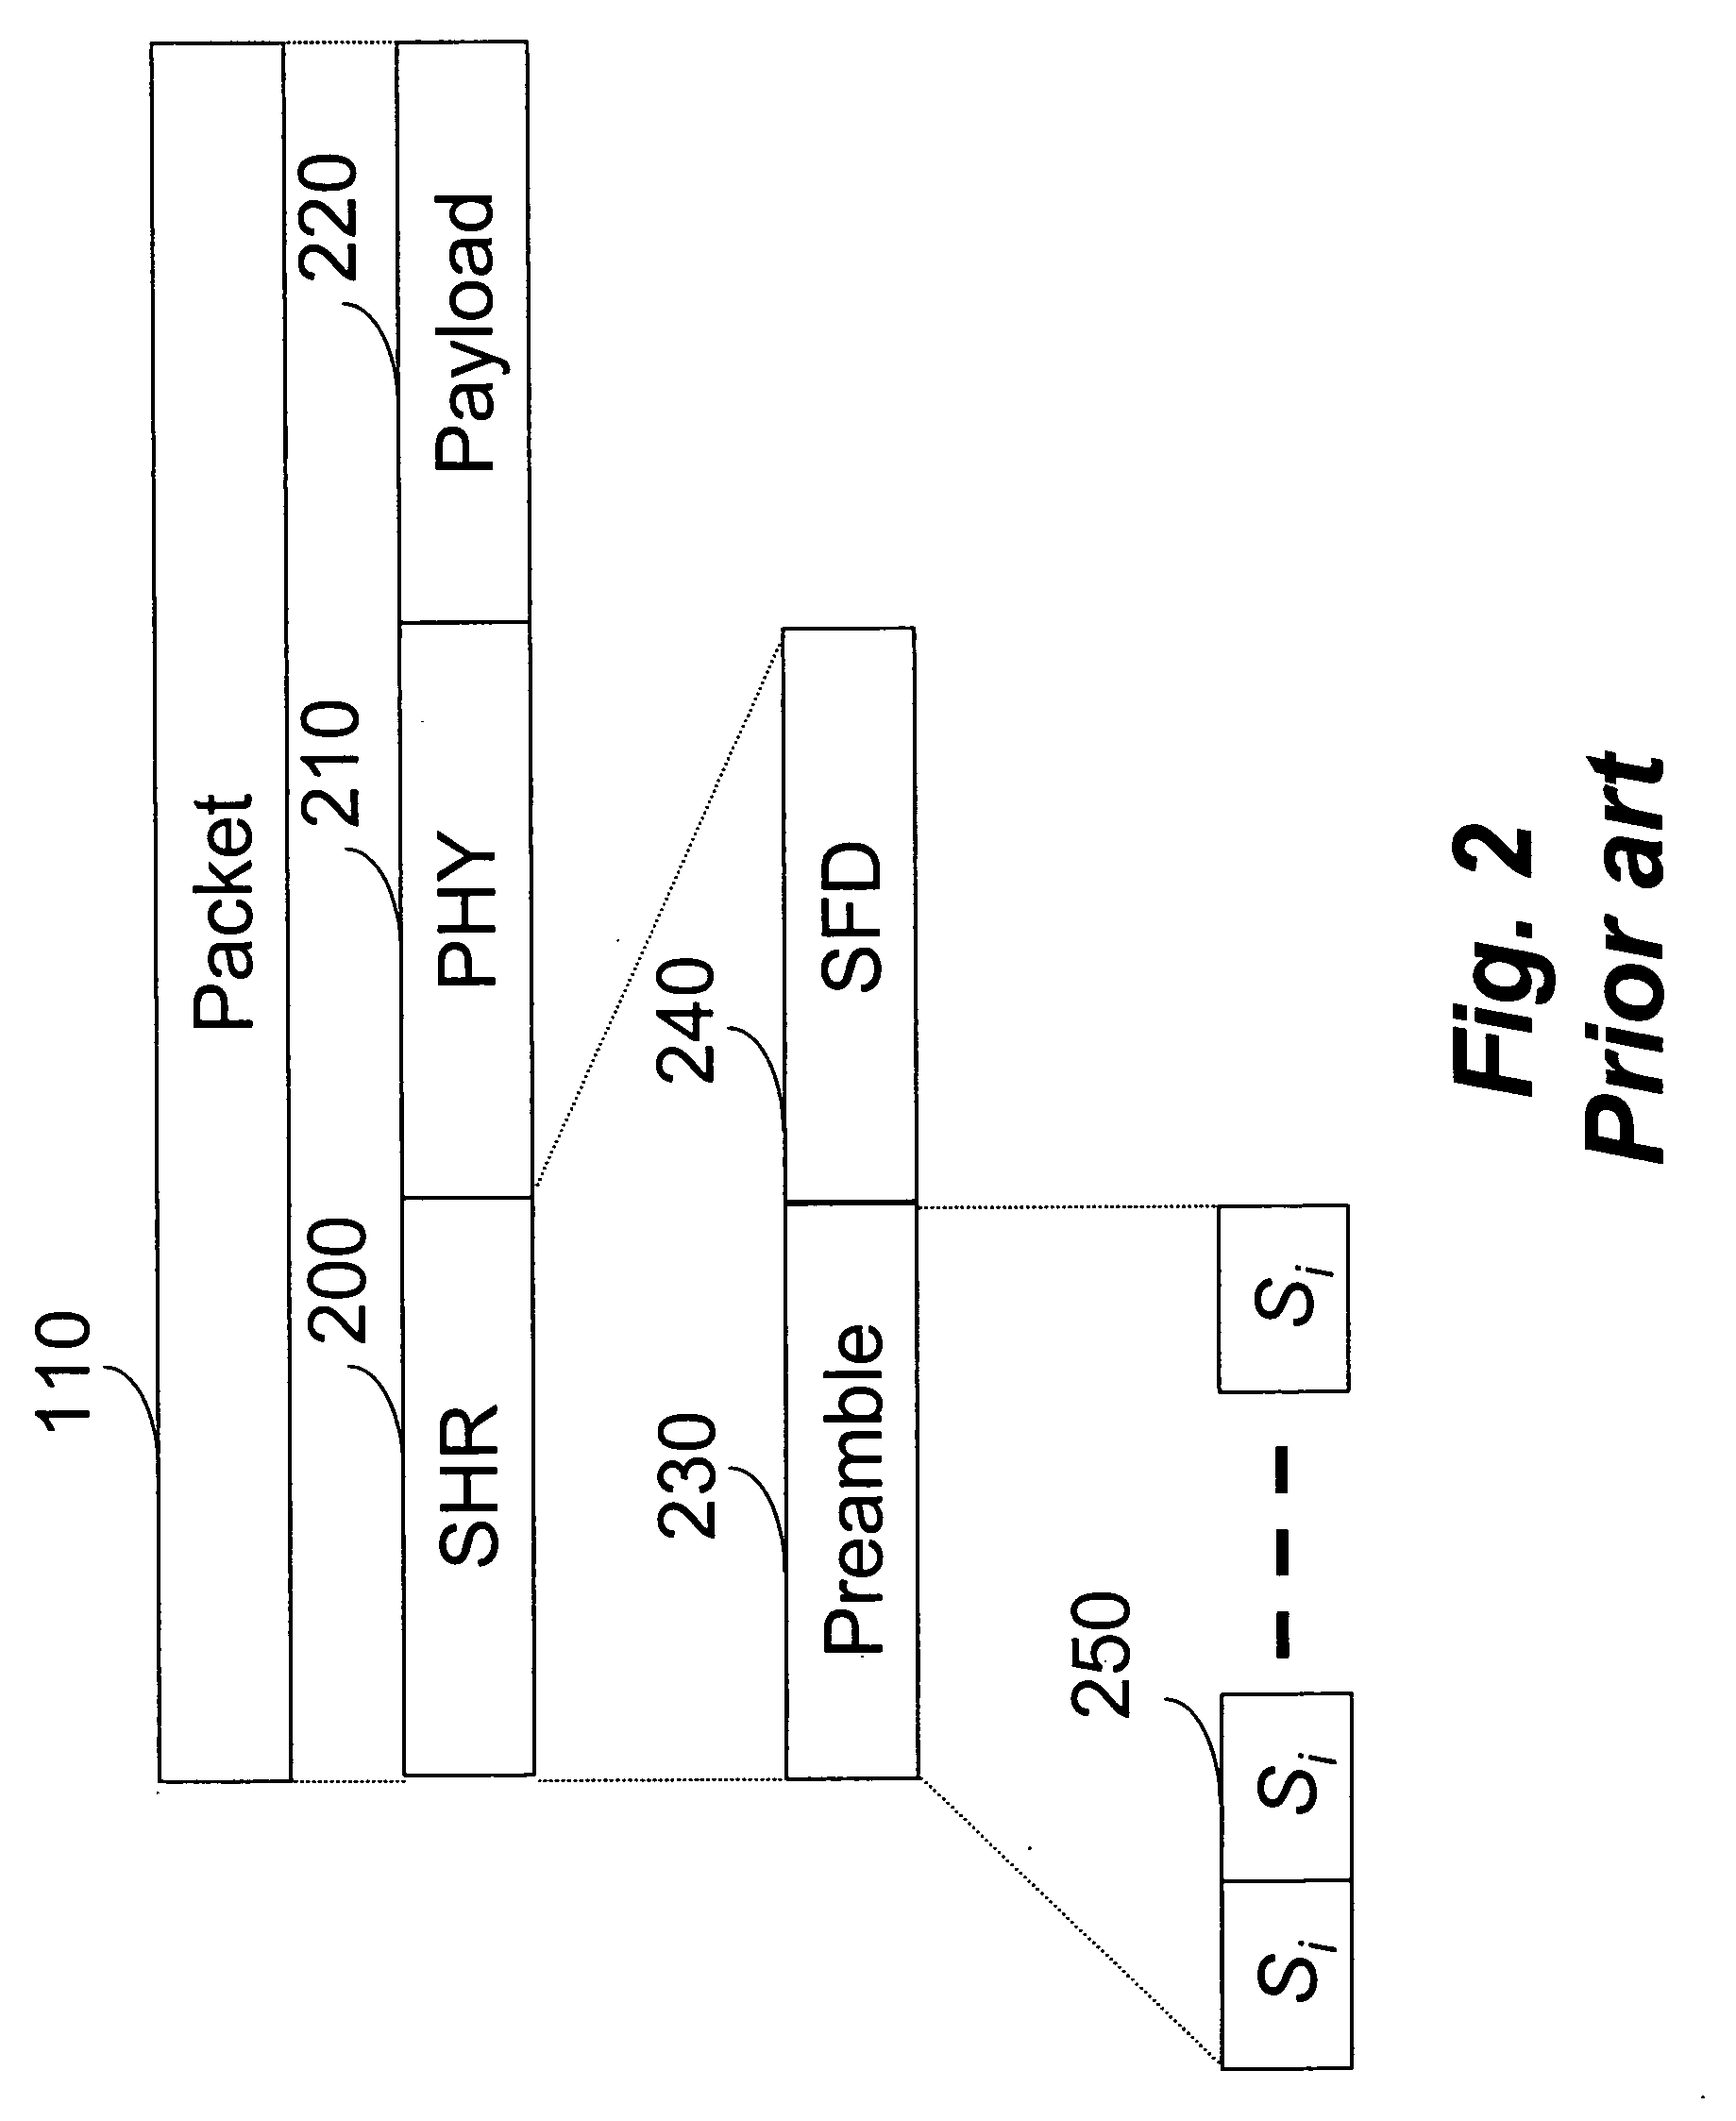 System and method for radar tracking using communications packets